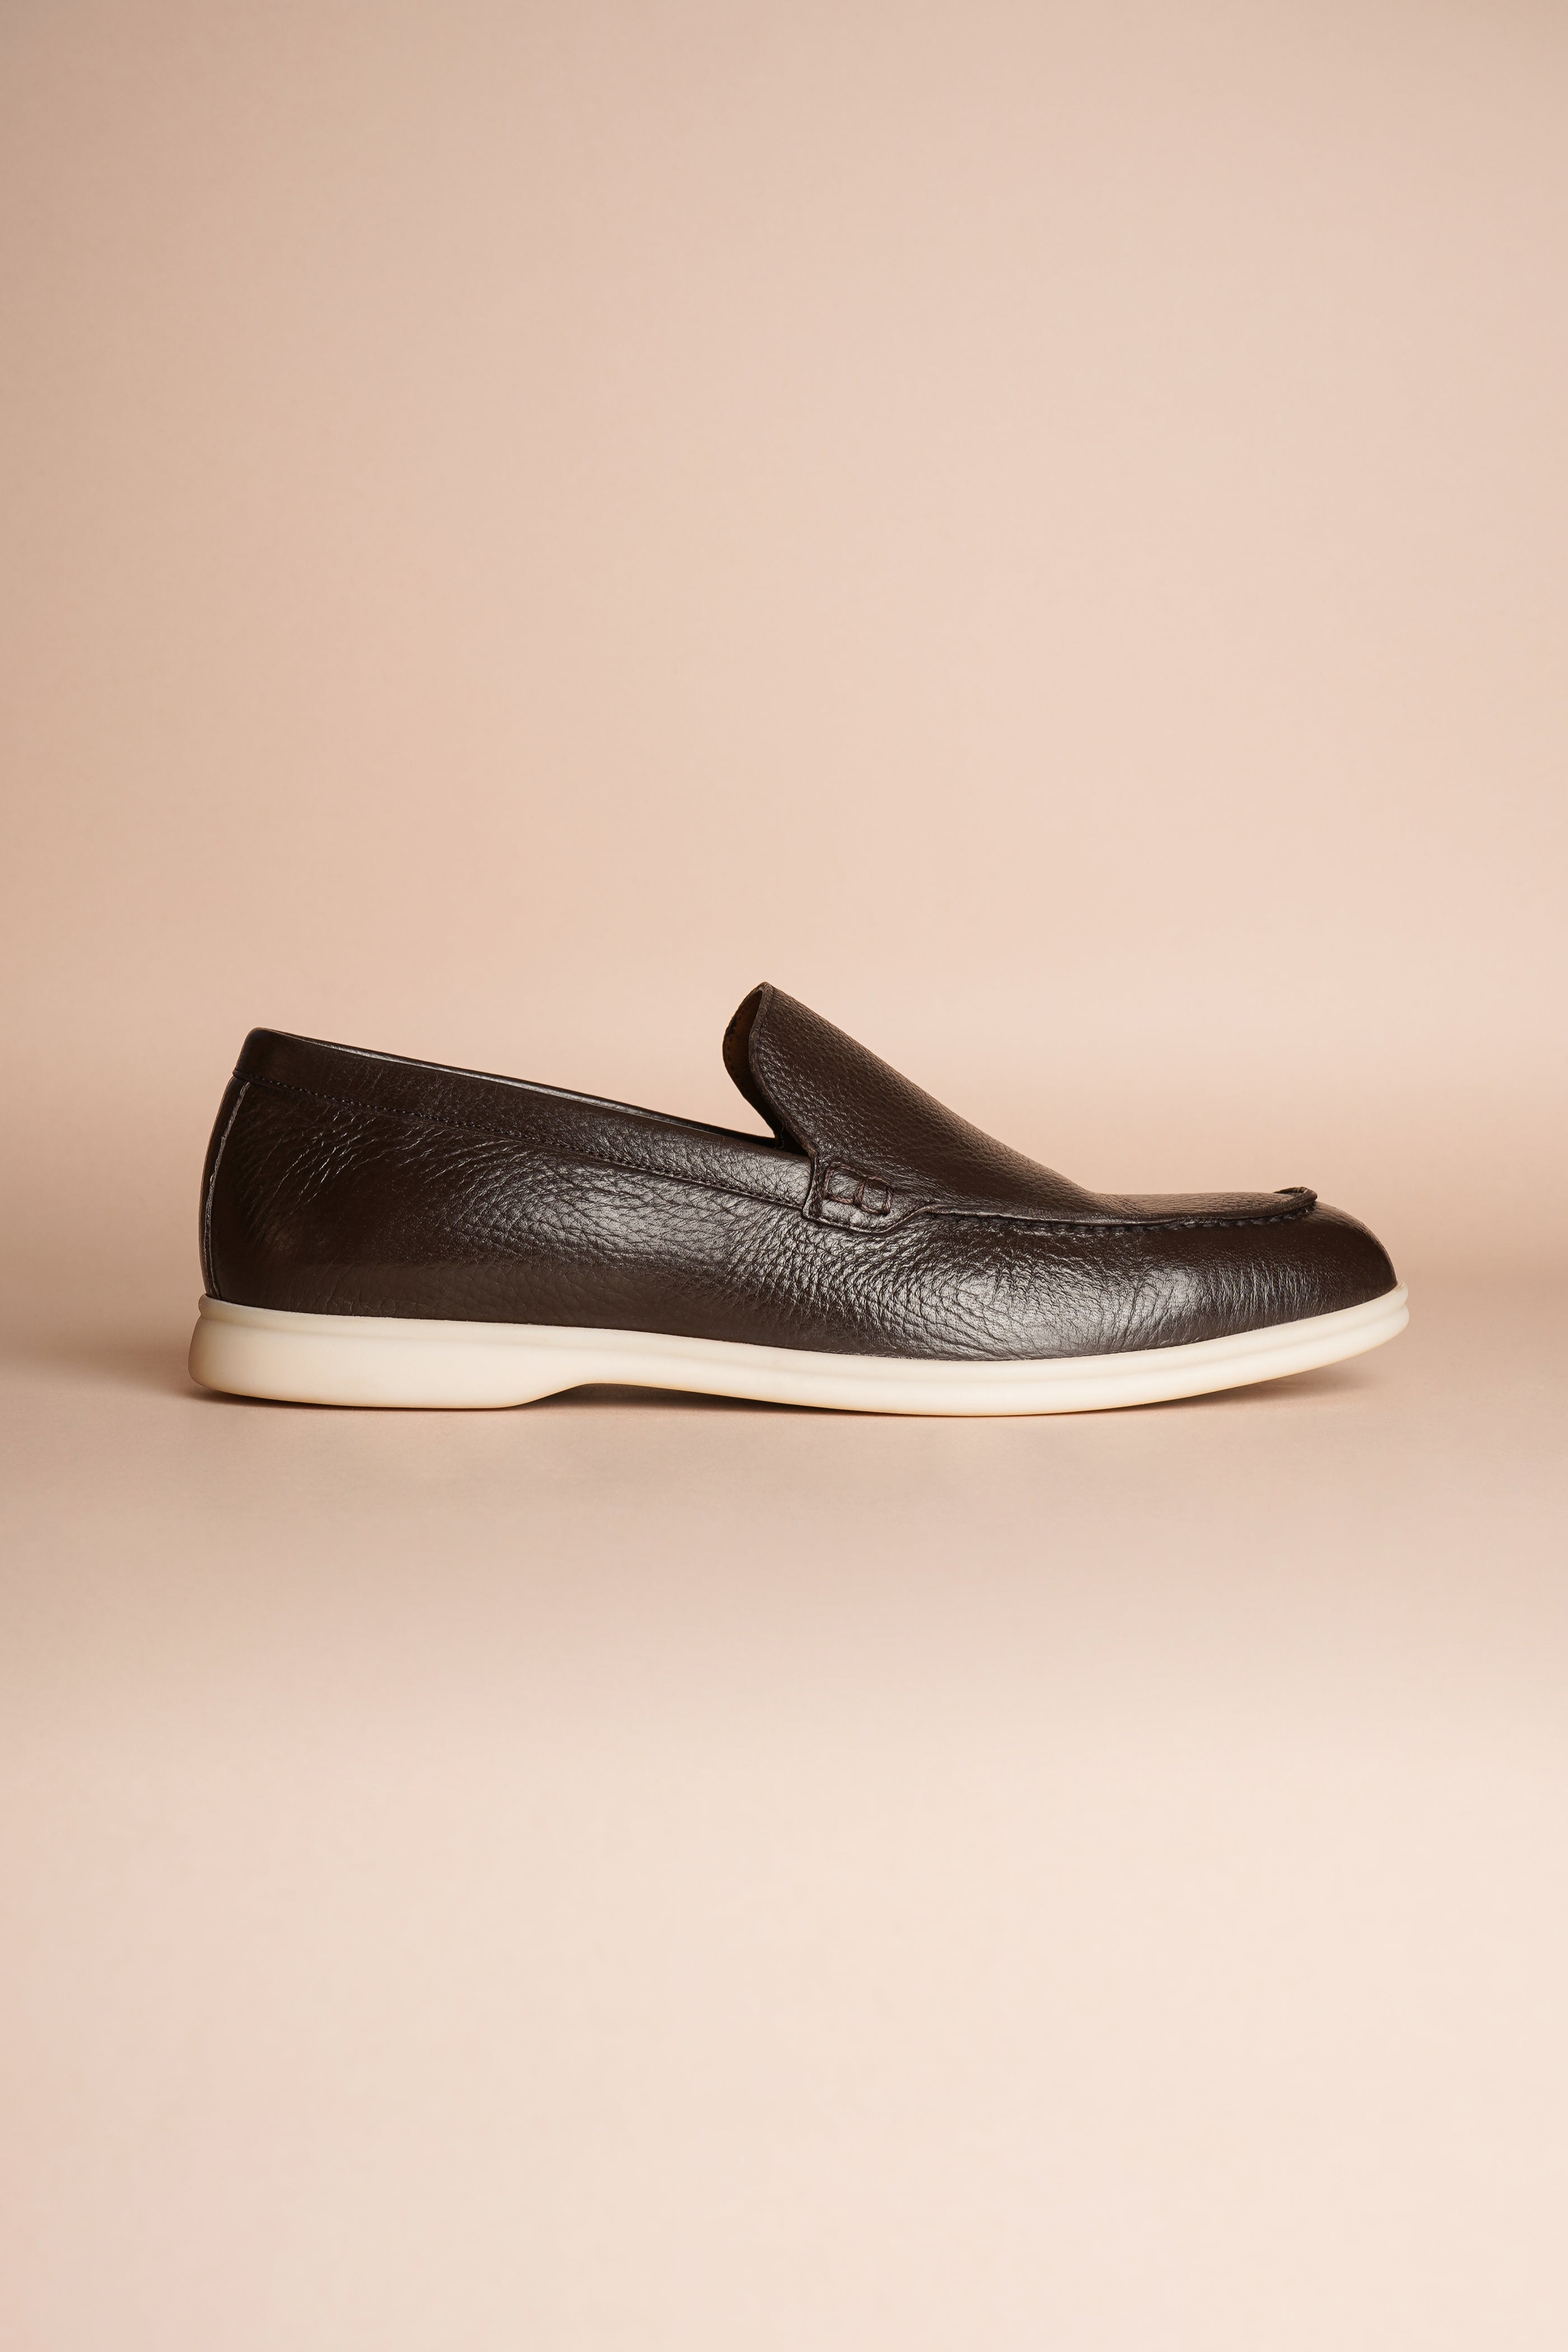 Beaumont Heritage Loafers